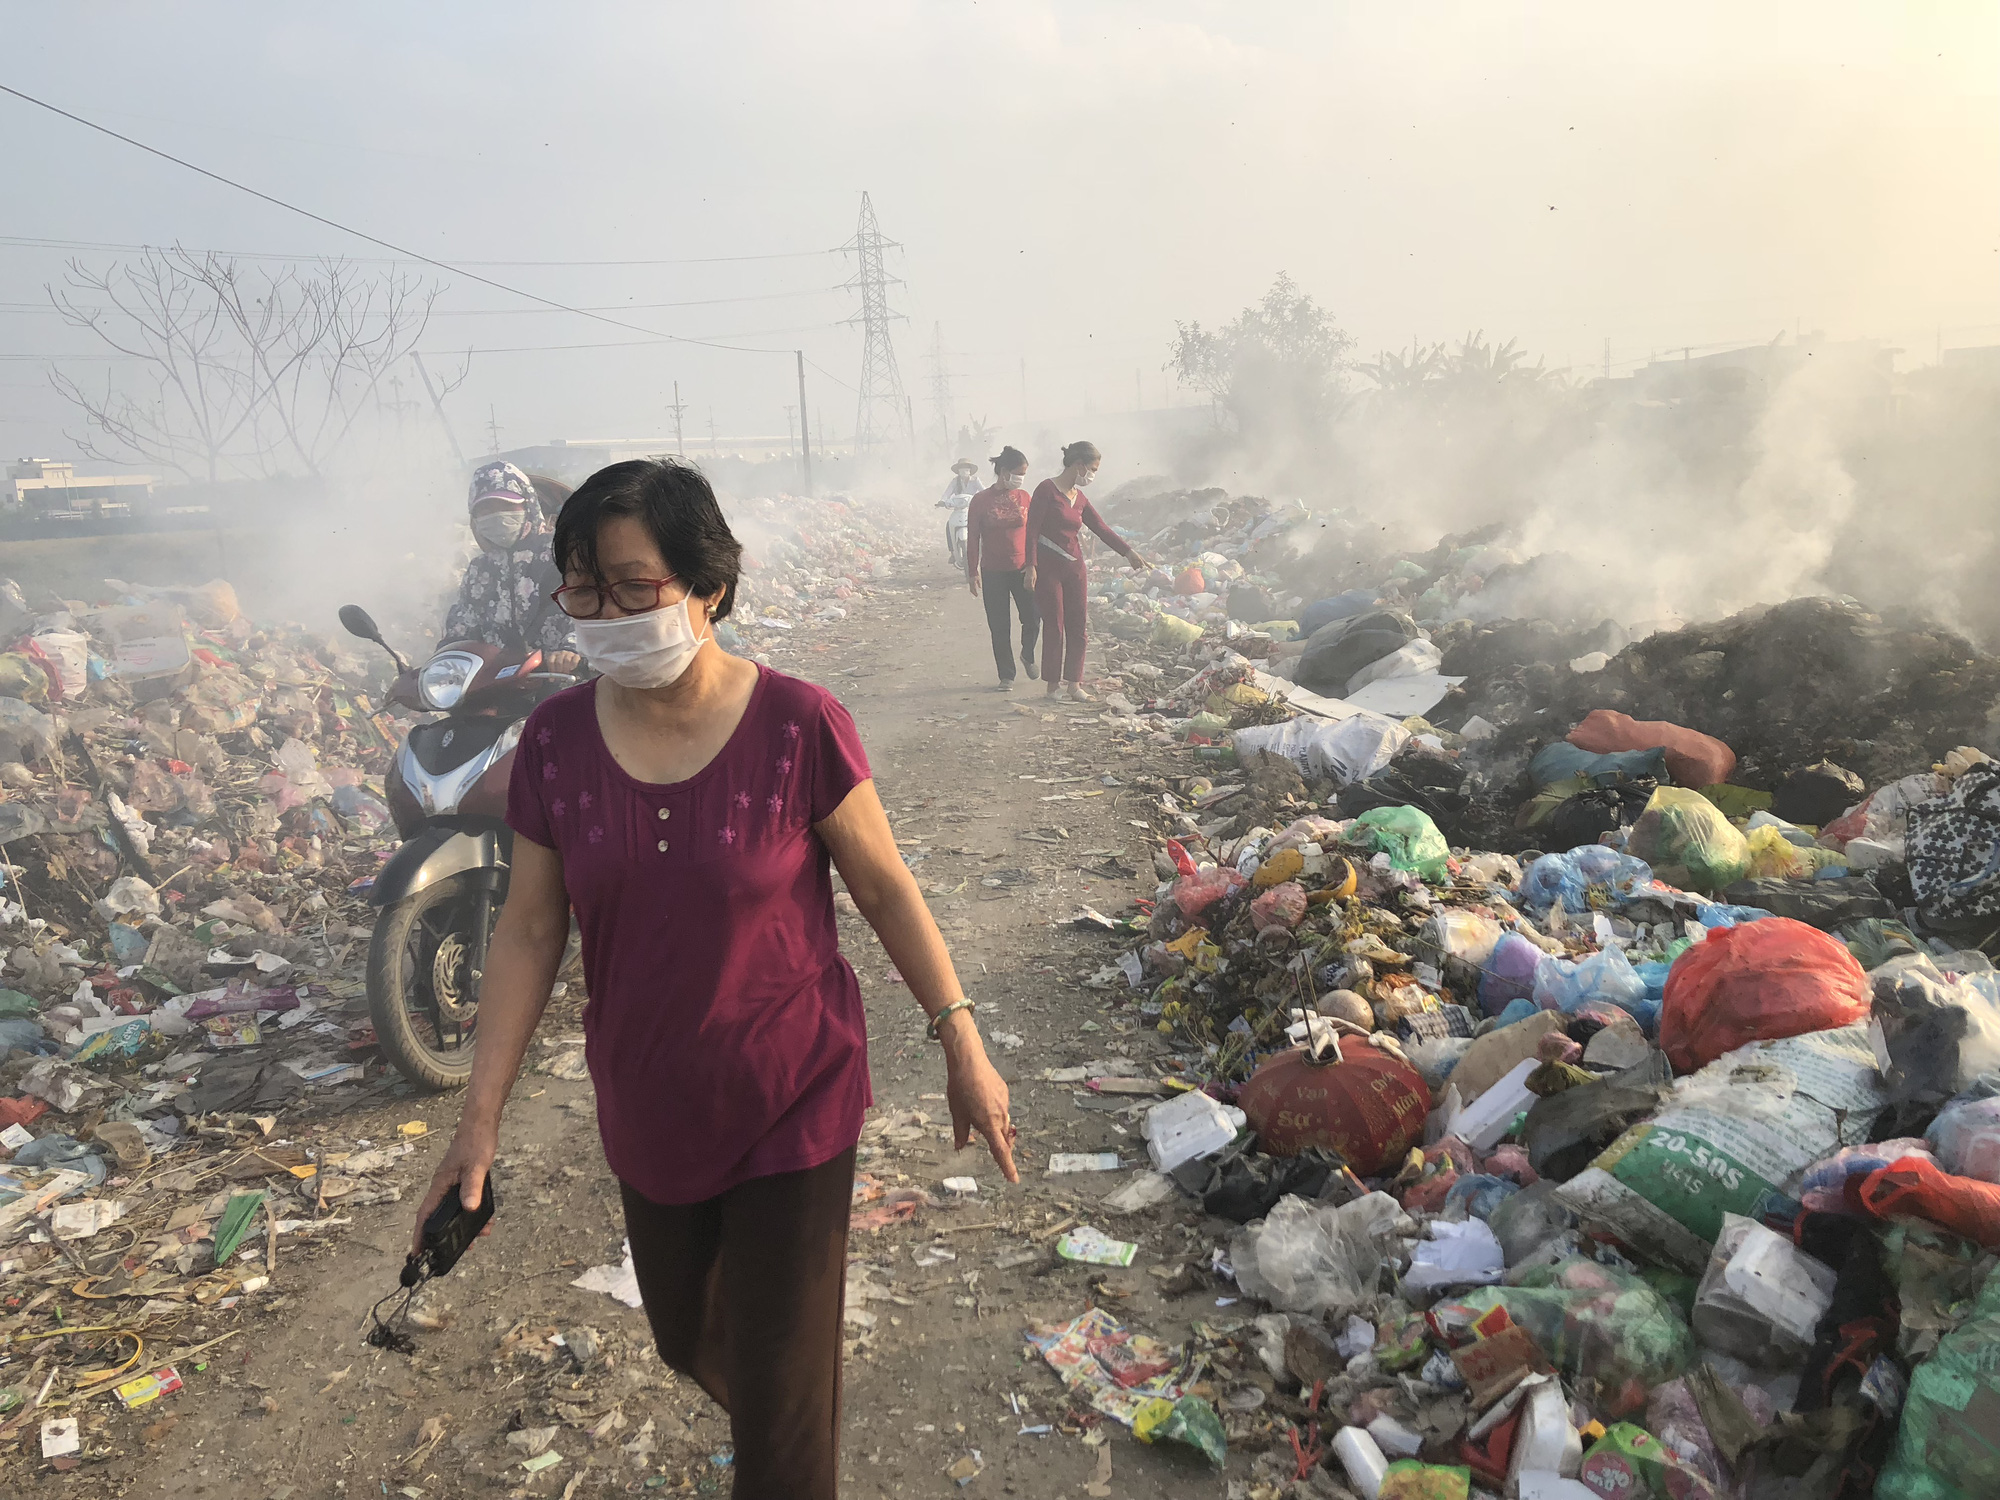 Vietnam’s ‘most polluted road’ poses serious health risks to residents